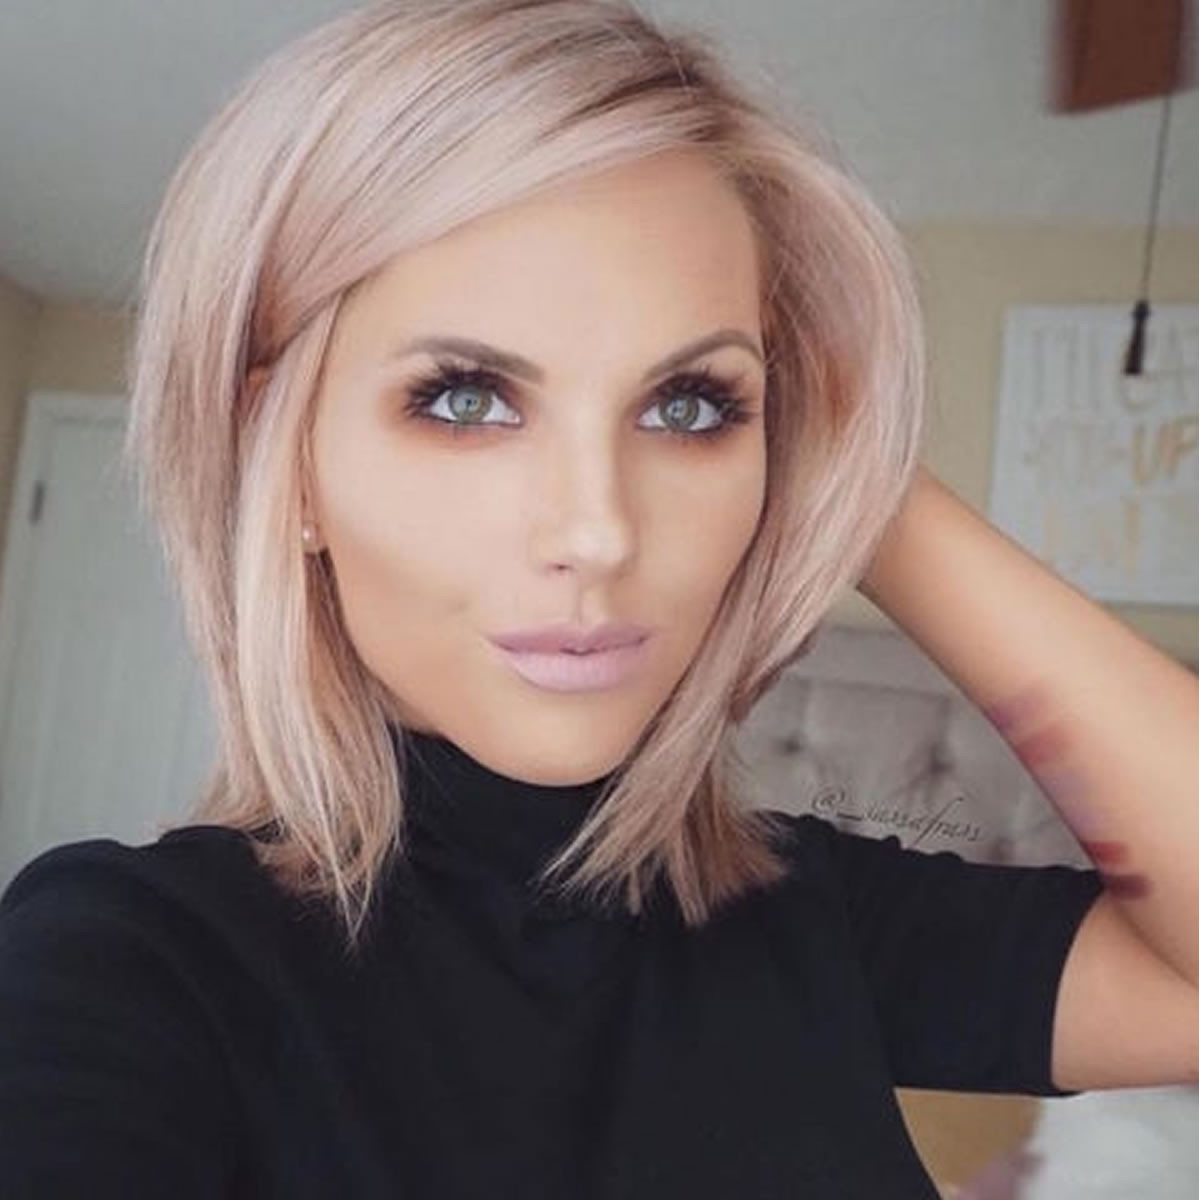 Short Bob Hairstyle
 The Best 30 Short Bob Haircuts – 2018 Short Hairstyles for